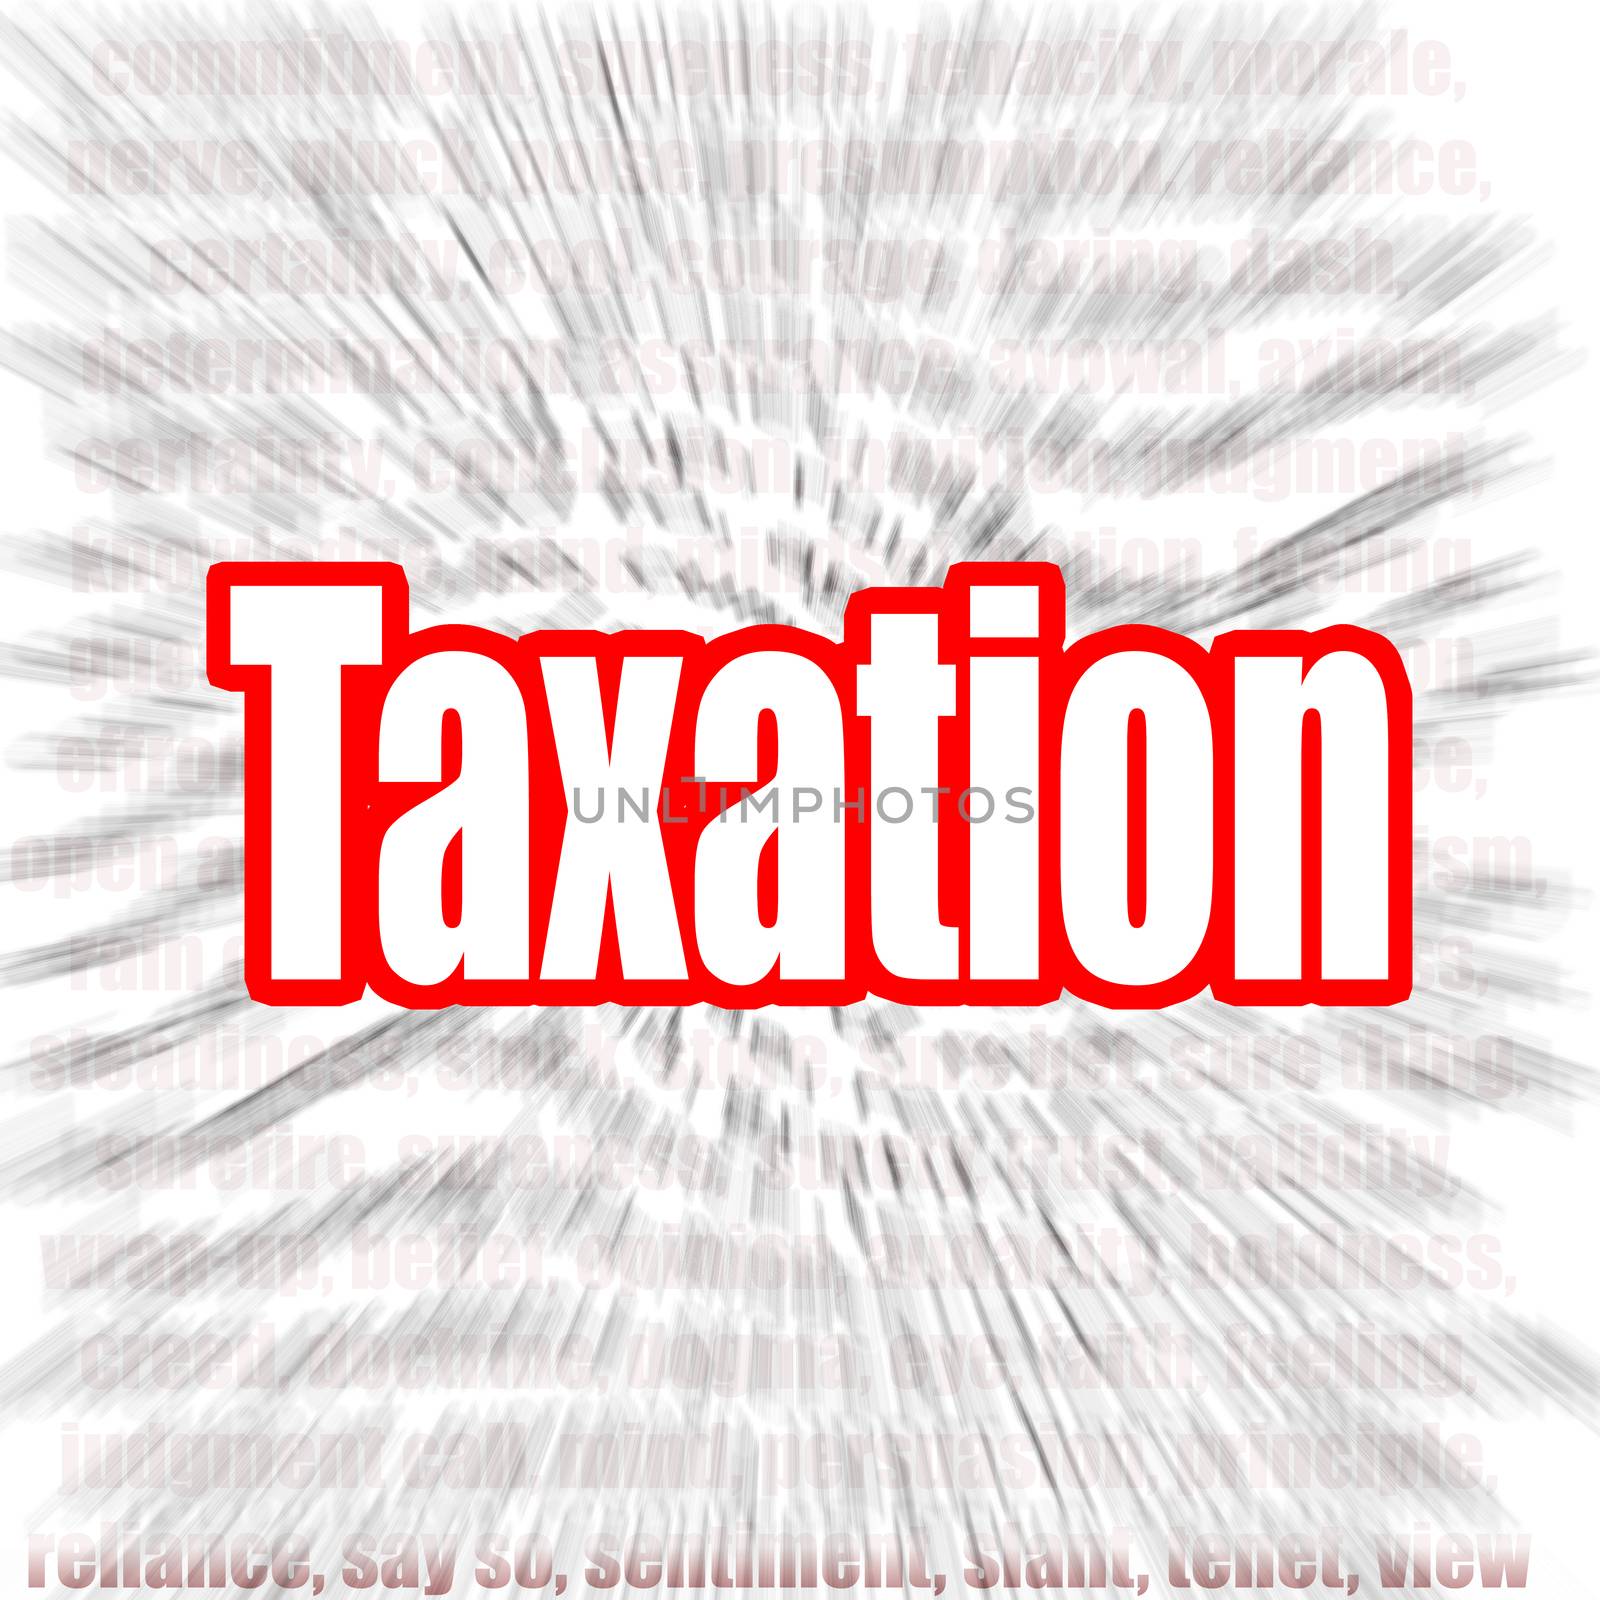 Taxation word with zoom in effect as background, 3D rendering